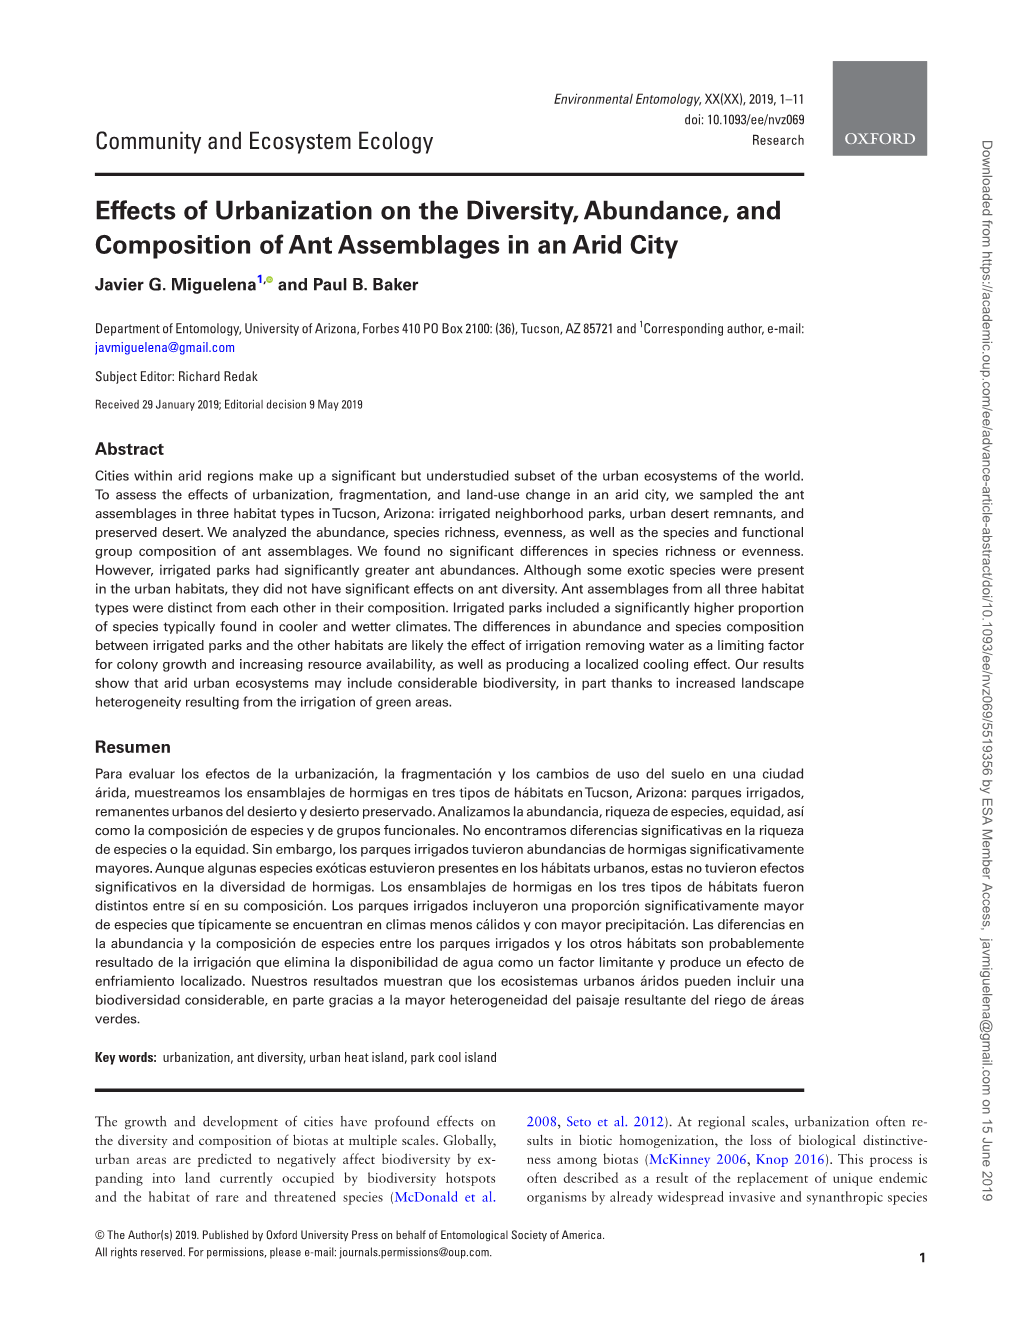 Effects of Urbanization on the Diversity, Abundance, and Composition of Ant Assemblages in an Arid City